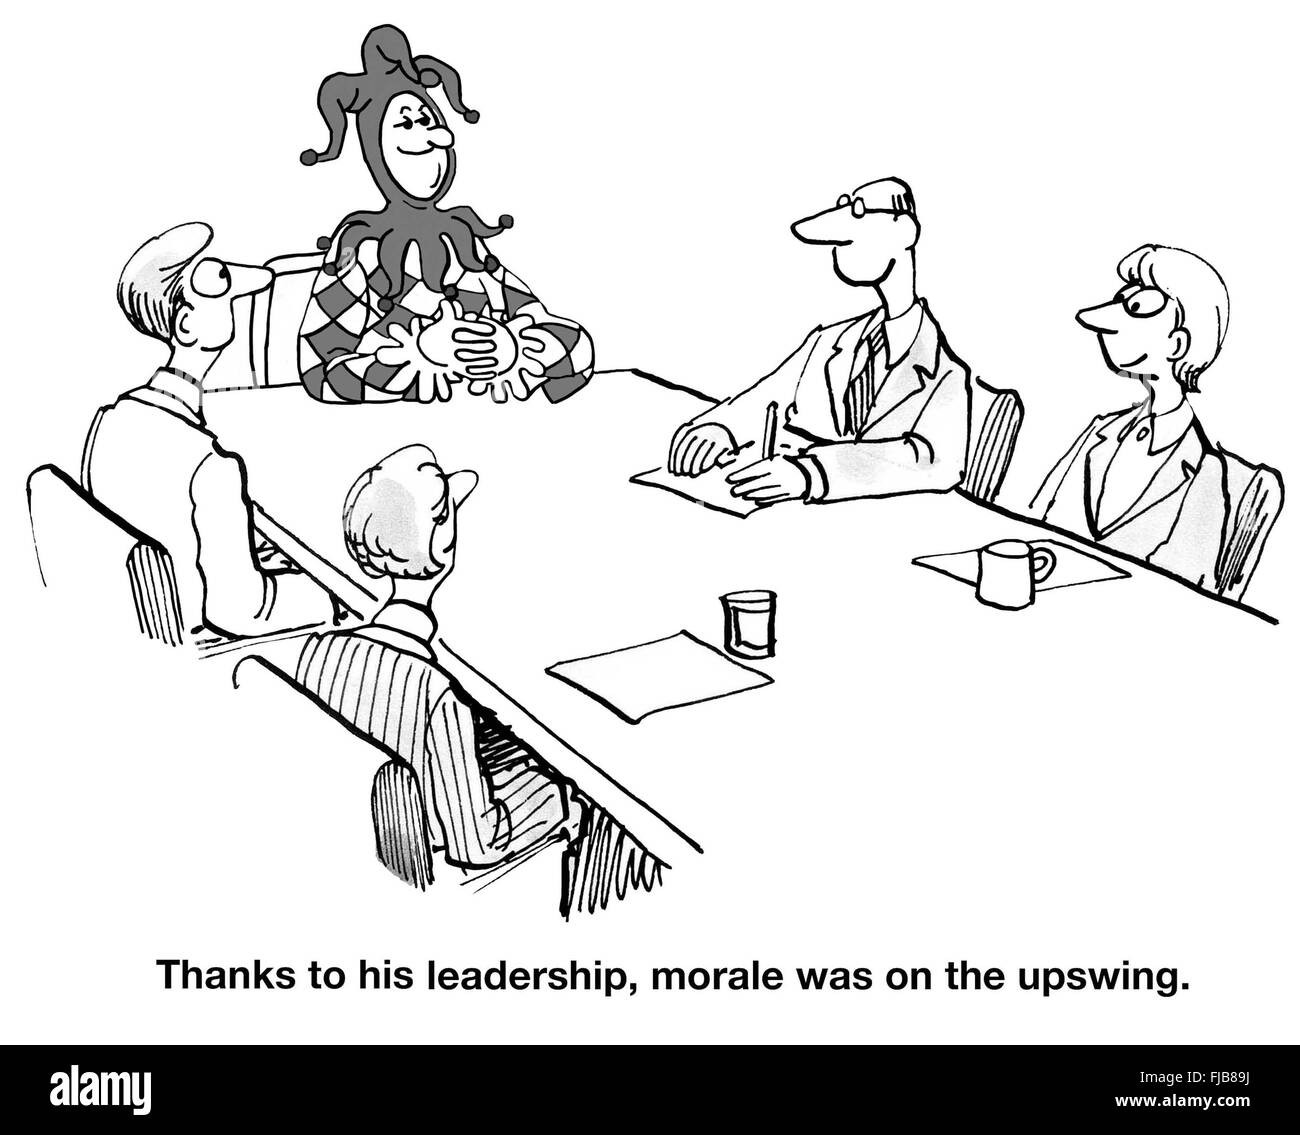 Business cartoon about an improvement in morale at the company. Stock Photo